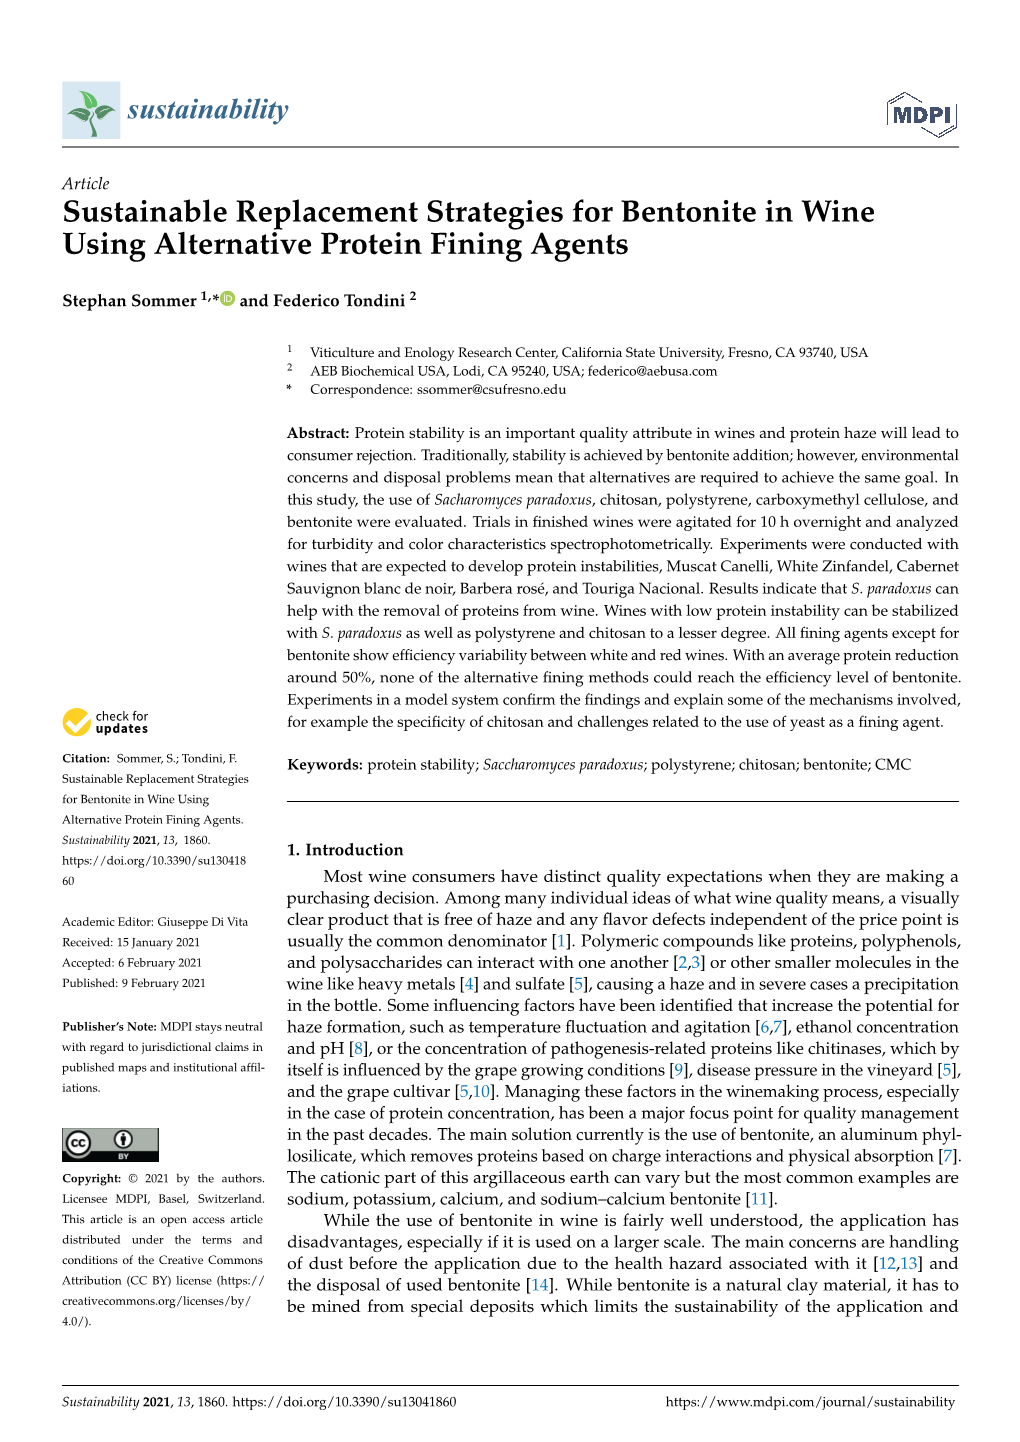 Sustainable Replacement Strategies for Bentonite in Wine Using Alternative Protein Fining Agents